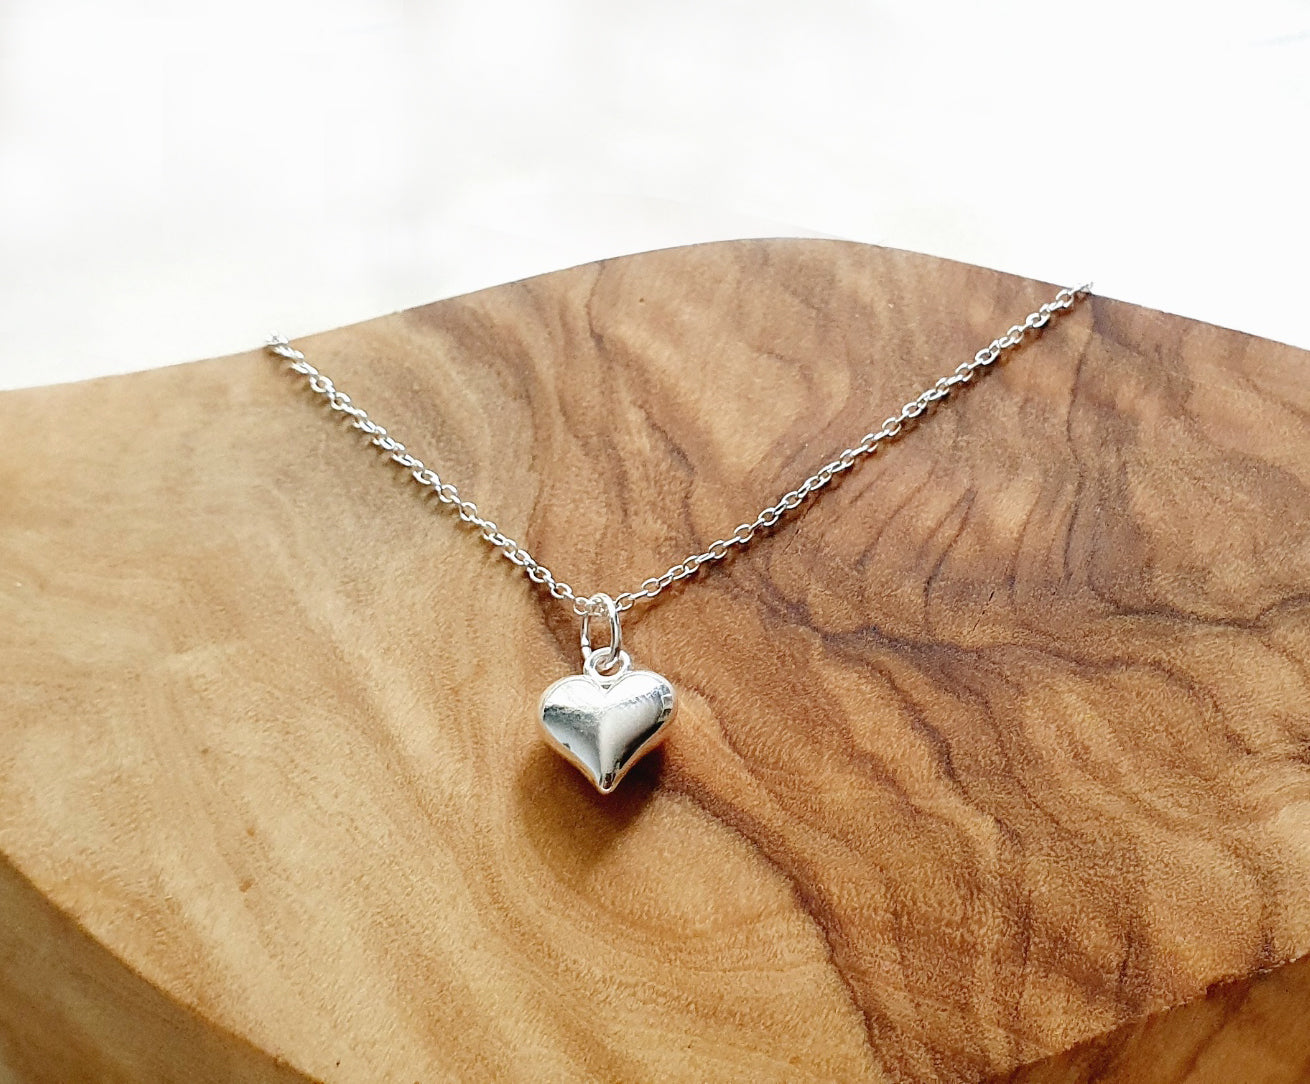 Teacher Puffy Heart Necklace in Sterling Silver 925, Personalised Gift